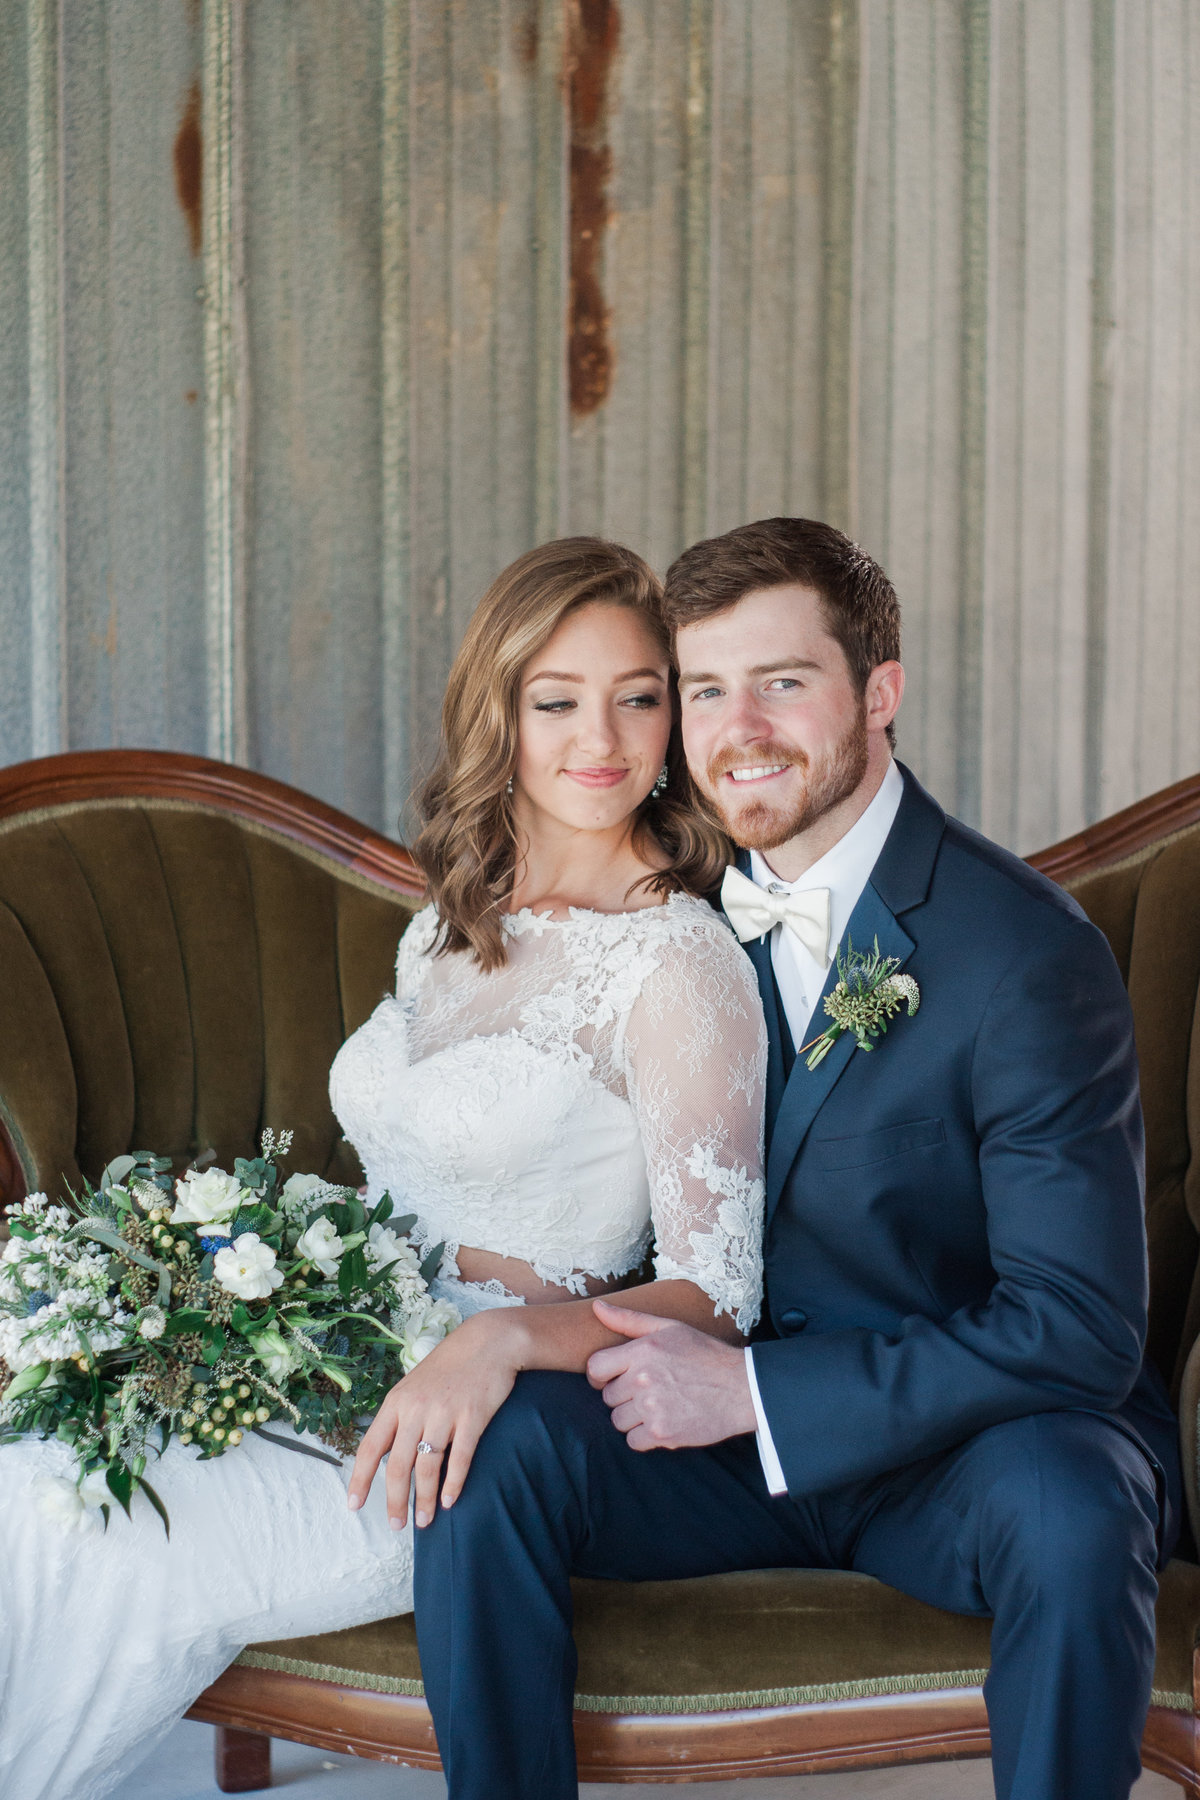 Barn wedding inspiration photographed at Fussell Farm by Boone Photographer Wayfaring Wanderer. Fussell Farm is a gorgeous venue in Millers Creek, NC.